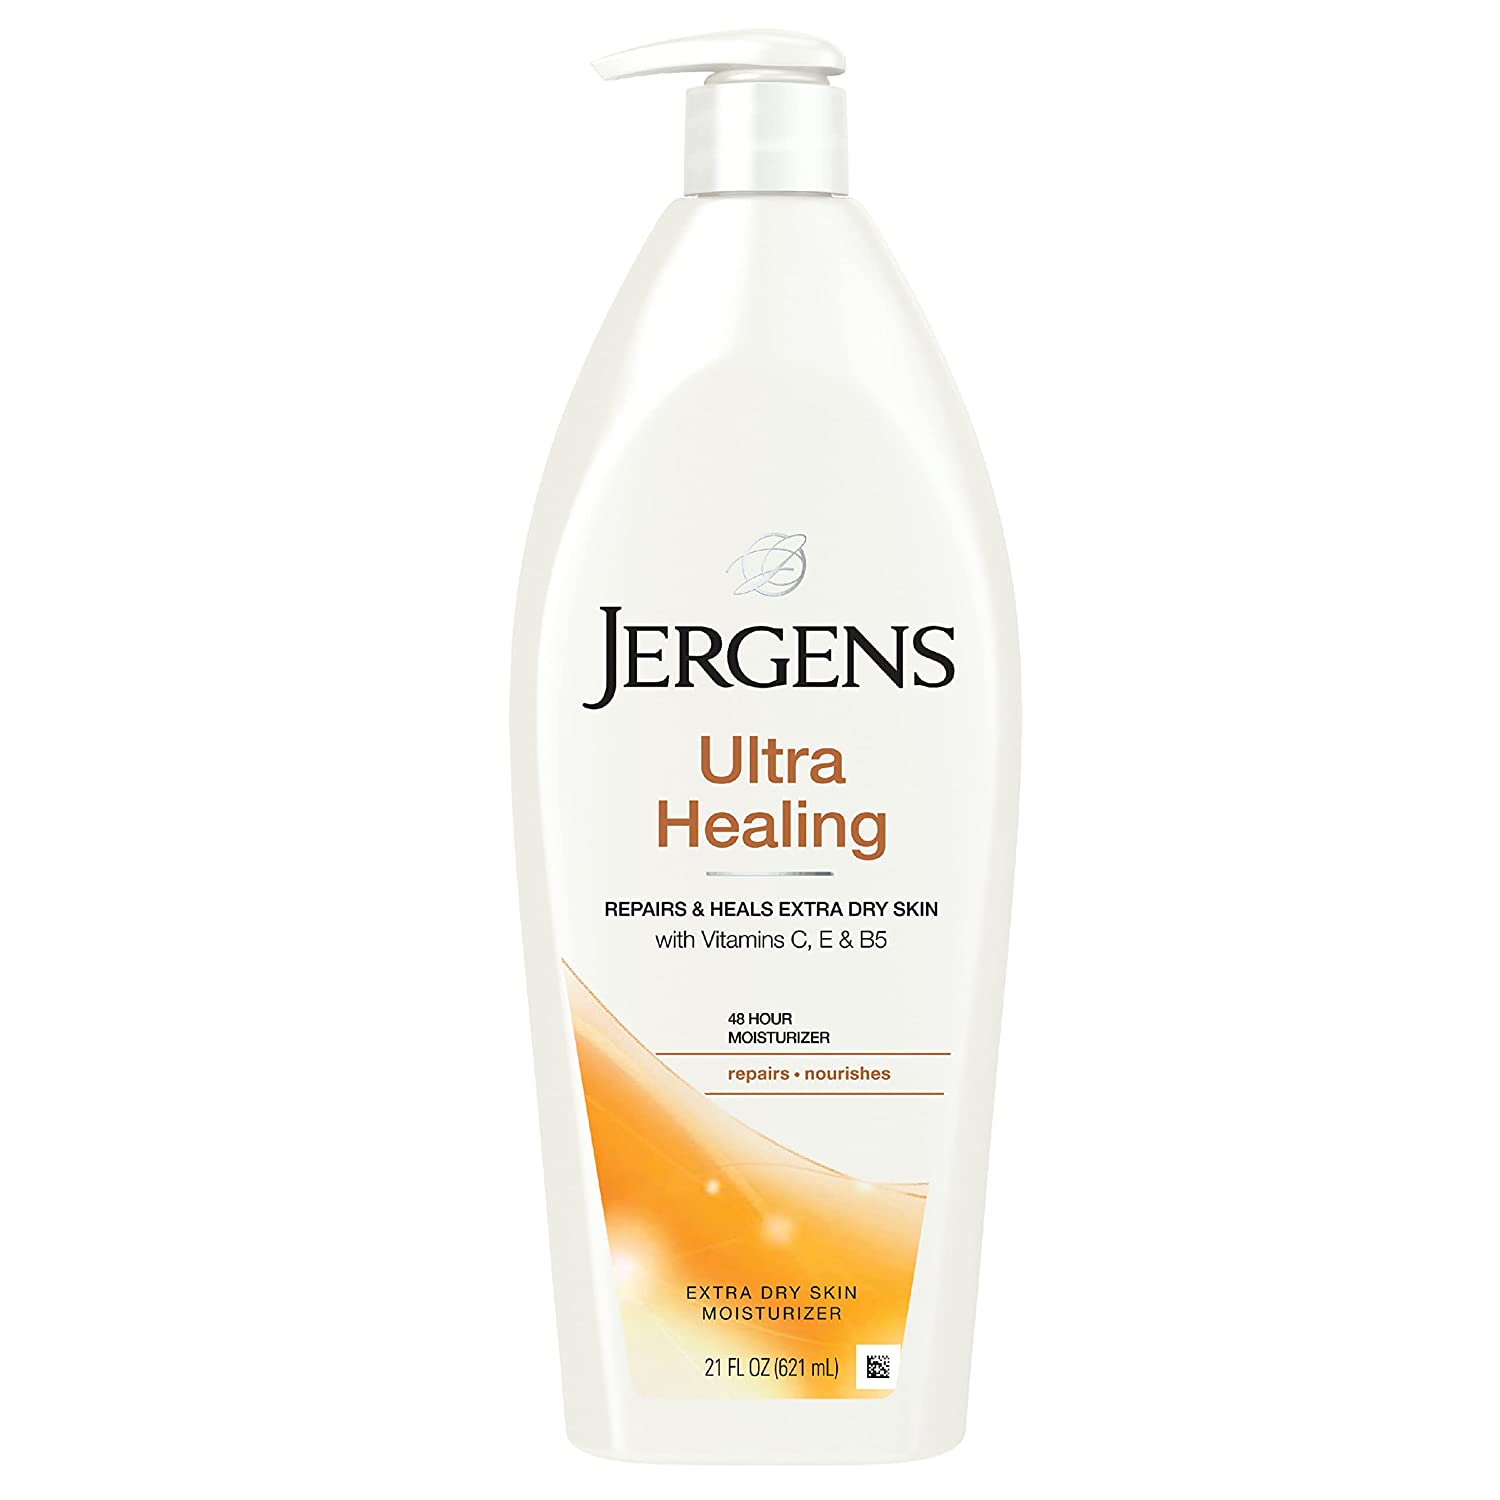 Jergens Is Recalling This Moisturizer Due To Possible Contamination